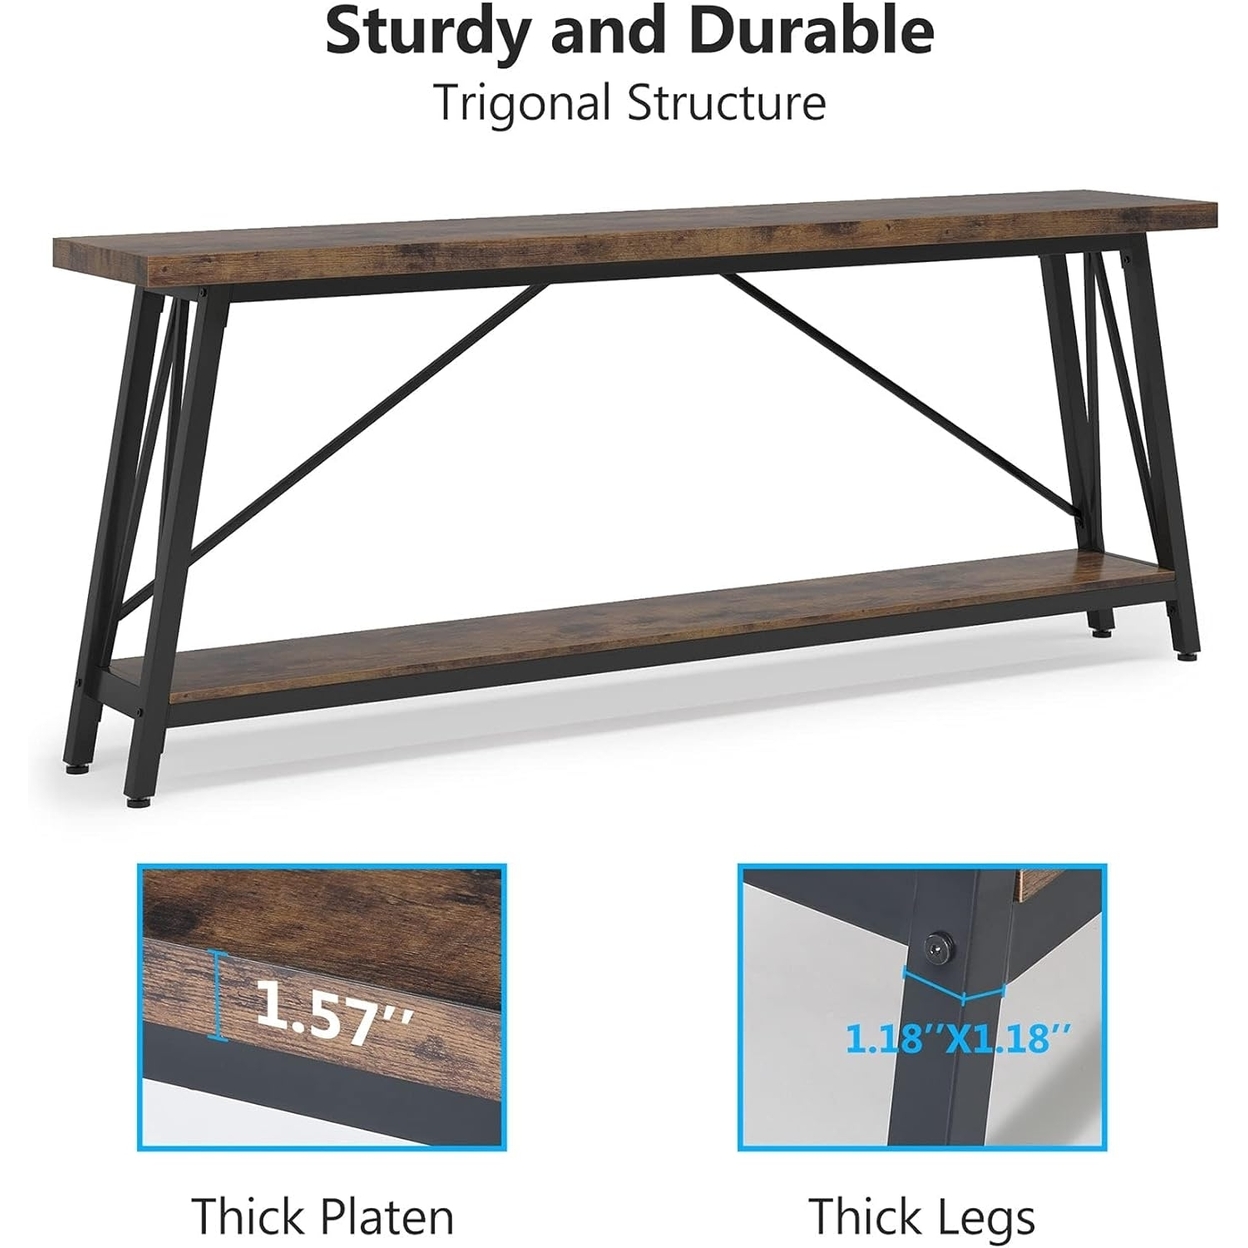 Tribesigns 70.9 Extra Long Sofa Table Behind Couch, Industrial Entry Console Table - Dark Brown